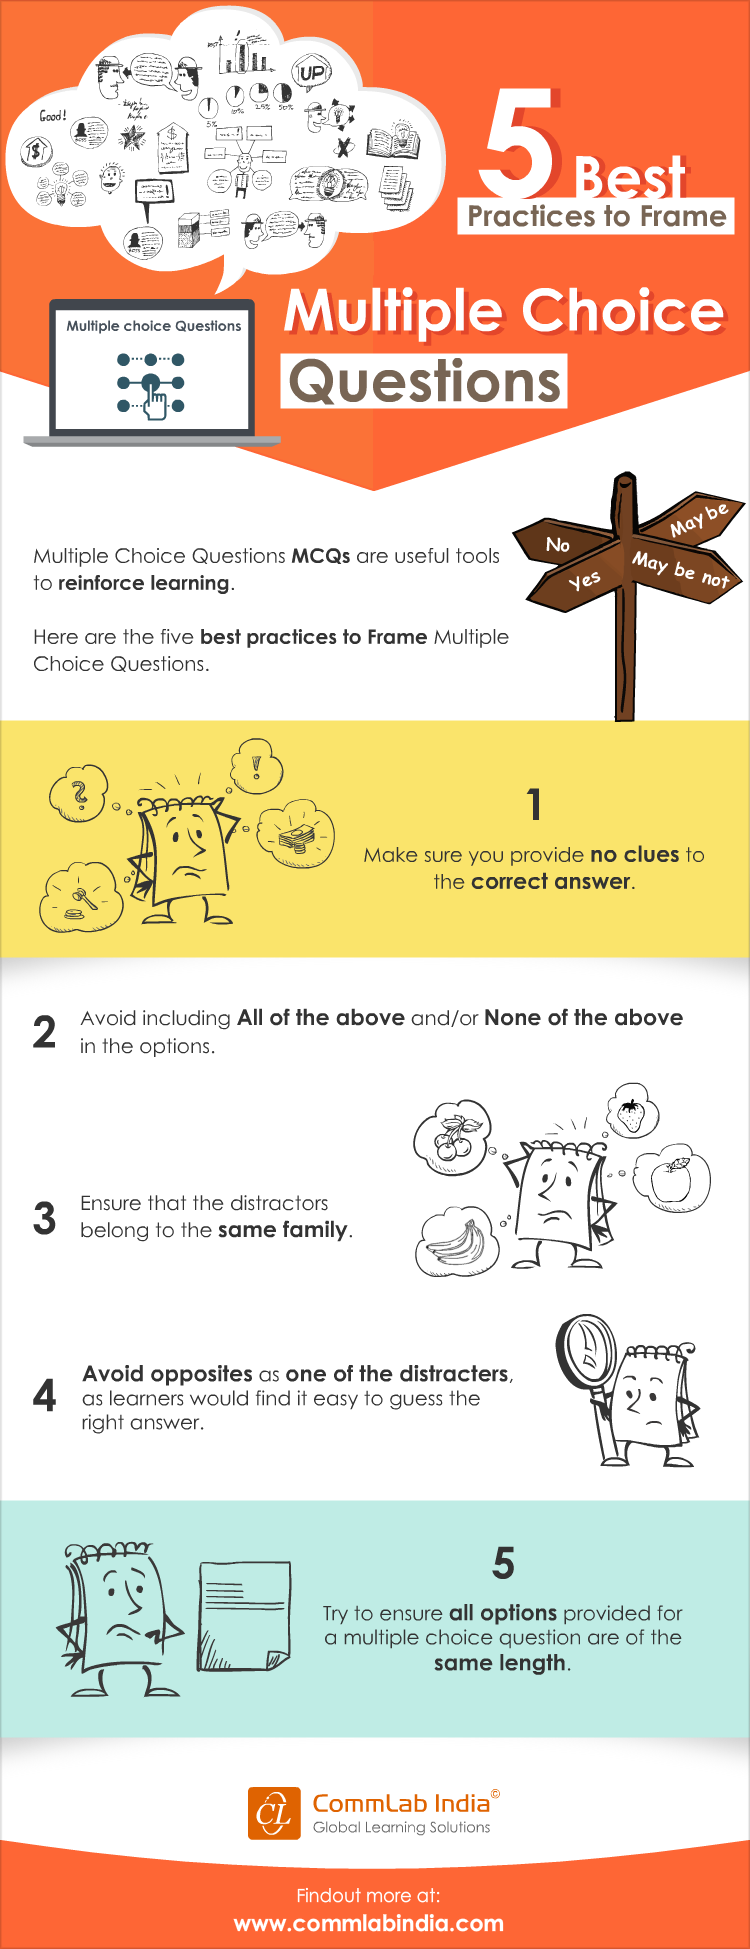 5 Best Practices to Frame Multiple Choice Questions in E-learning [Infographic]